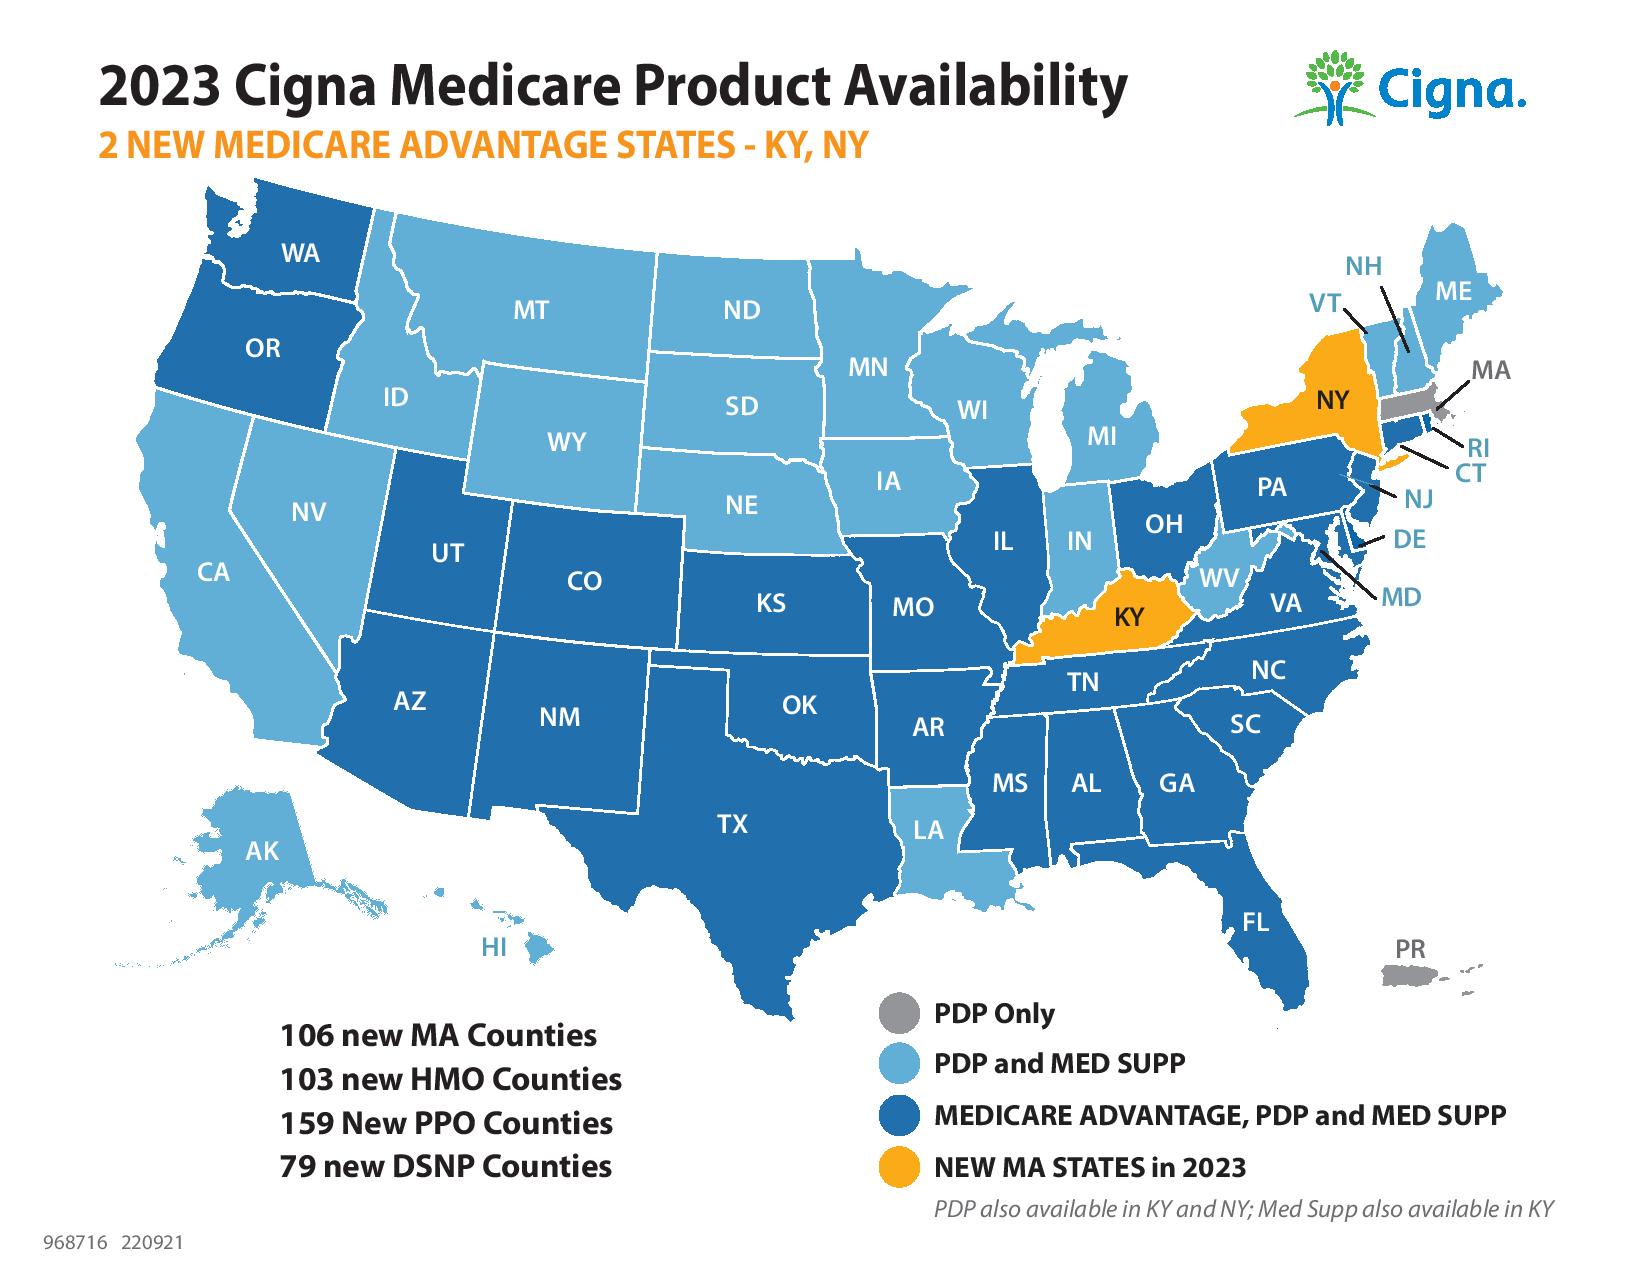 During this year’s Annual Election Period, which begins Oct. 15, Cigna will offer Medicare Advantage (MA) plans in 581 counties within 28 states, growing its geographic presence by 22 percent.